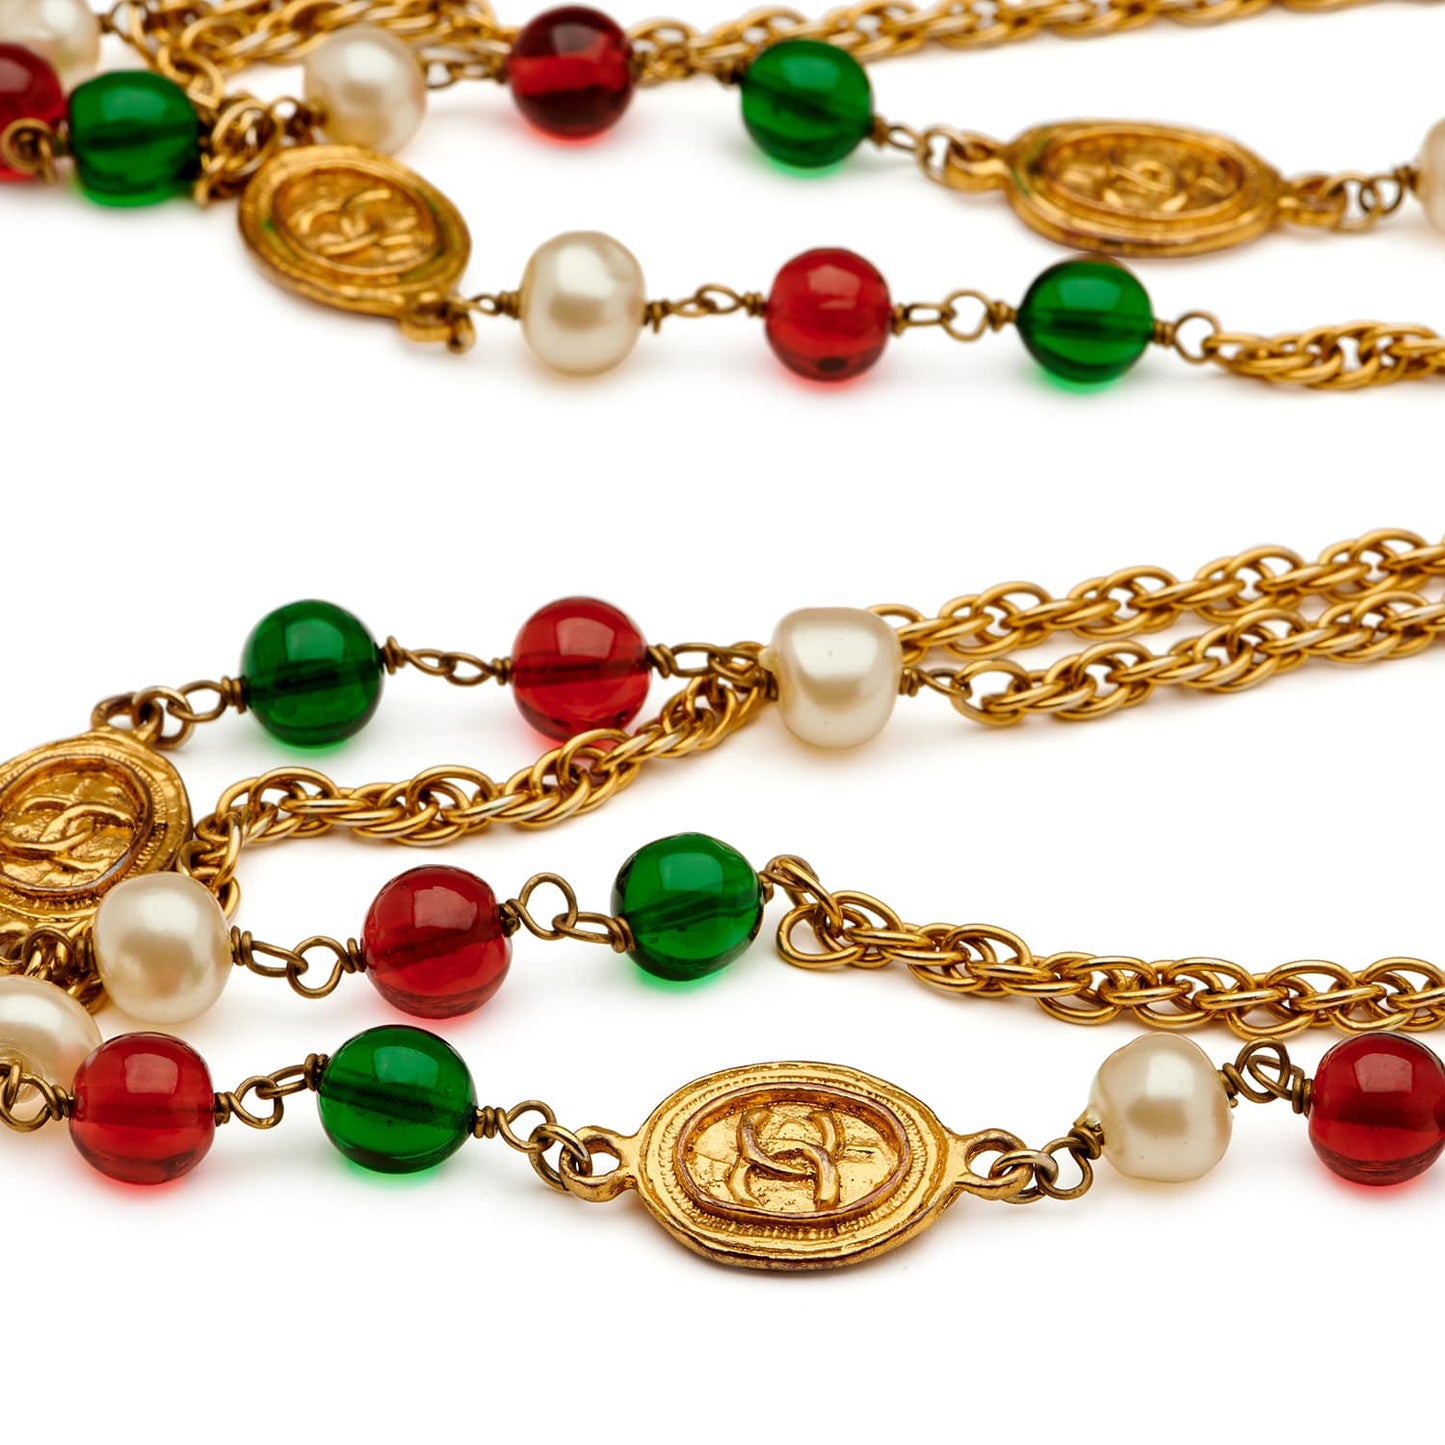 CHANEL Vintage Double Long Stamped Beaded Necklace